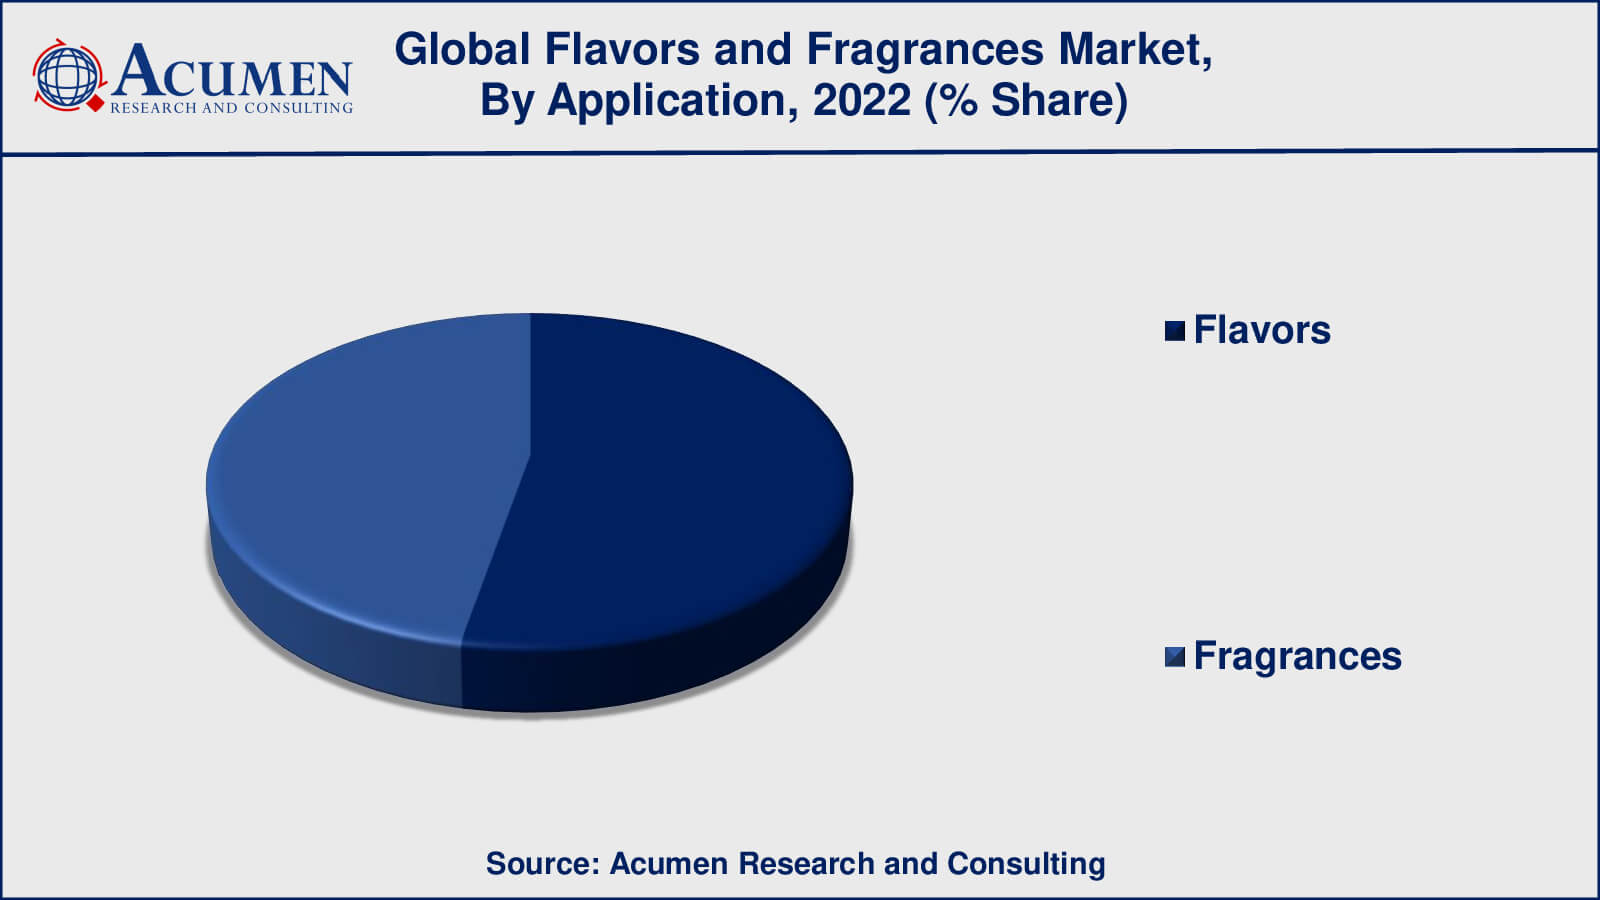 Flavors and Fragrances Market Opportunities